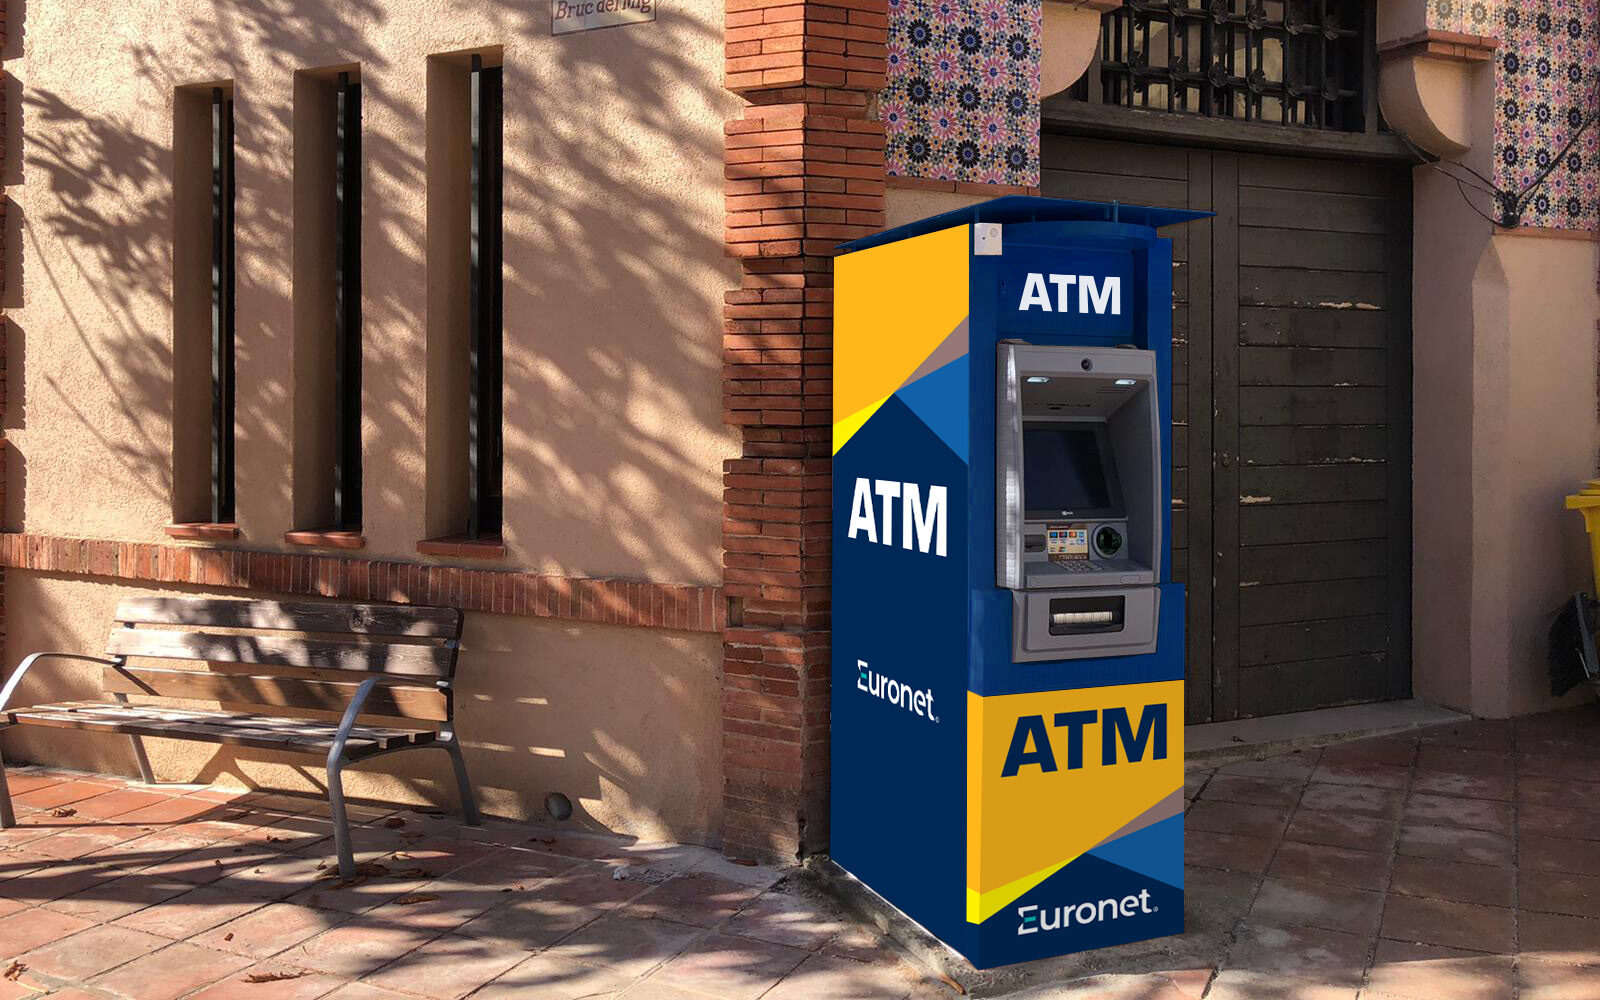 Here is a community ATM in Spain